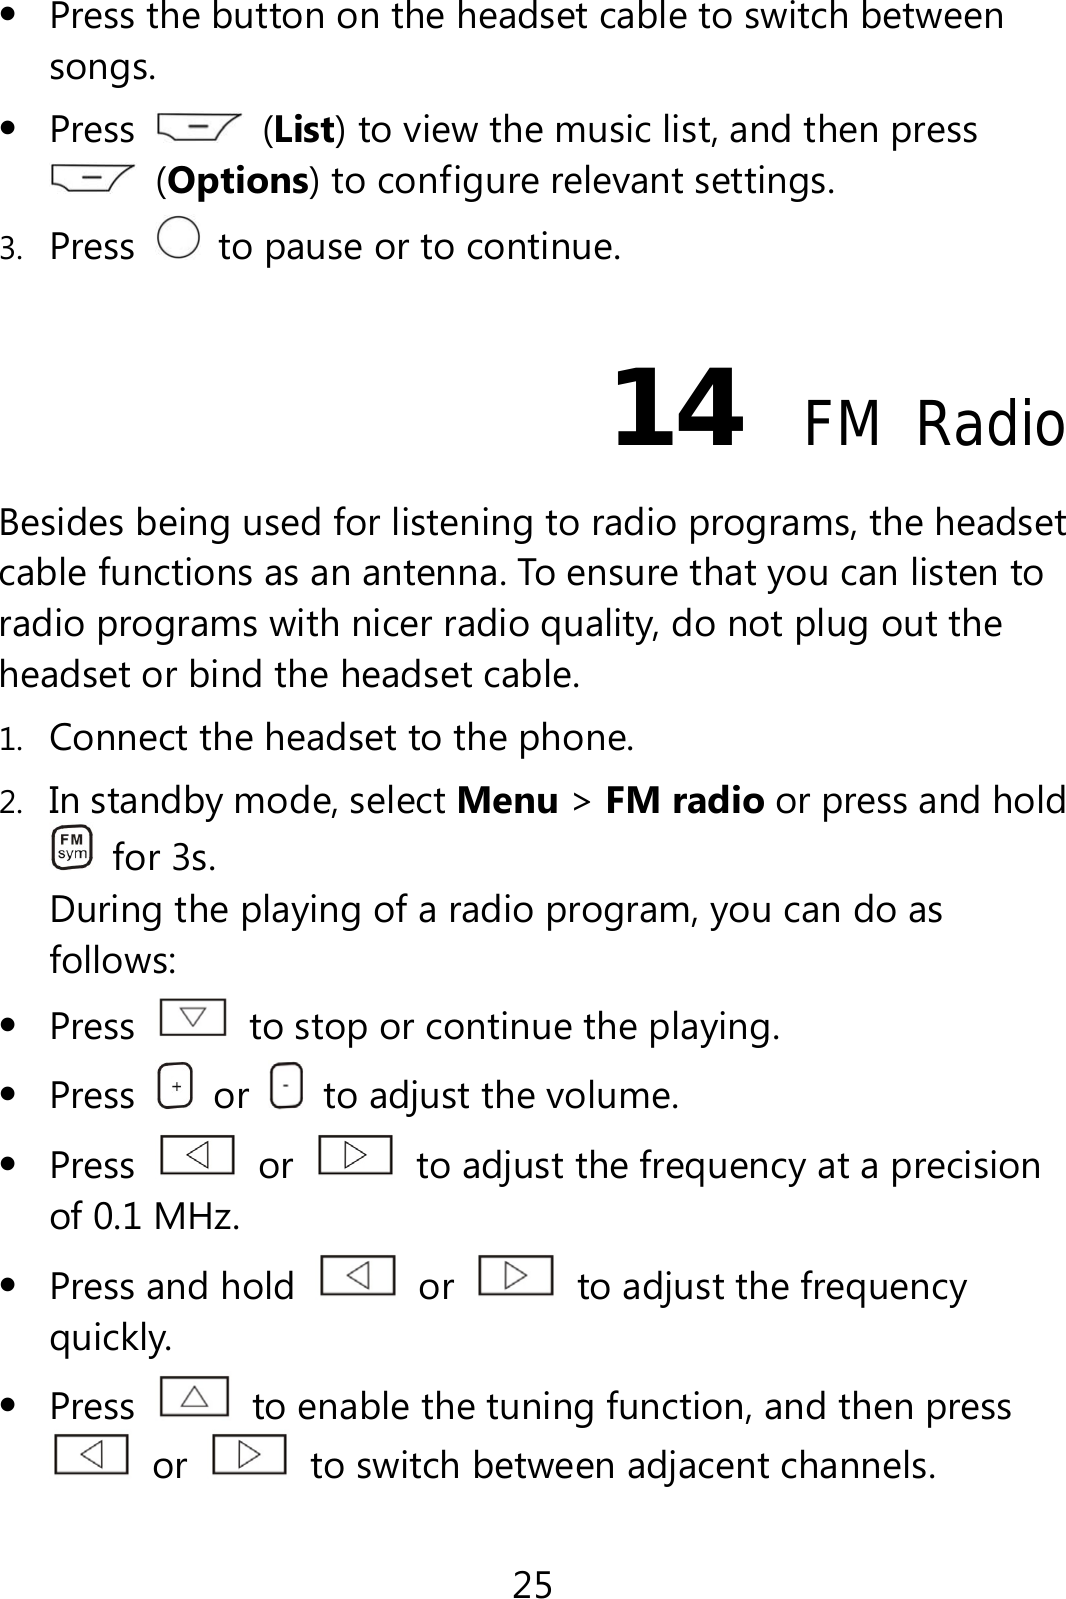 25  Press the button on the headset cable to switch between songs.  Press   (List) to view the music list, and then press  (Options) to configure relevant settings. 3. Press    to pause or to continue. 14  FM Radio Besides being used for listening to radio programs, the headset cable functions as an antenna. To ensure that you can listen to radio programs with nicer radio quality, do not plug out the headset or bind the headset cable. 1. Connect the headset to the phone. 2. In standby mode, select Menu &gt; FM radio or press and hold  for 3s. During the playing of a radio program, you can do as follows:  Press    to stop or continue the playing.  Press   or    to adjust the volume.  Press   or    to adjust the frequency at a precision of 0.1 MHz.  Press and hold   or    to adjust the frequency quickly.  Press    to enable the tuning function, and then press  or    to switch between adjacent channels. 